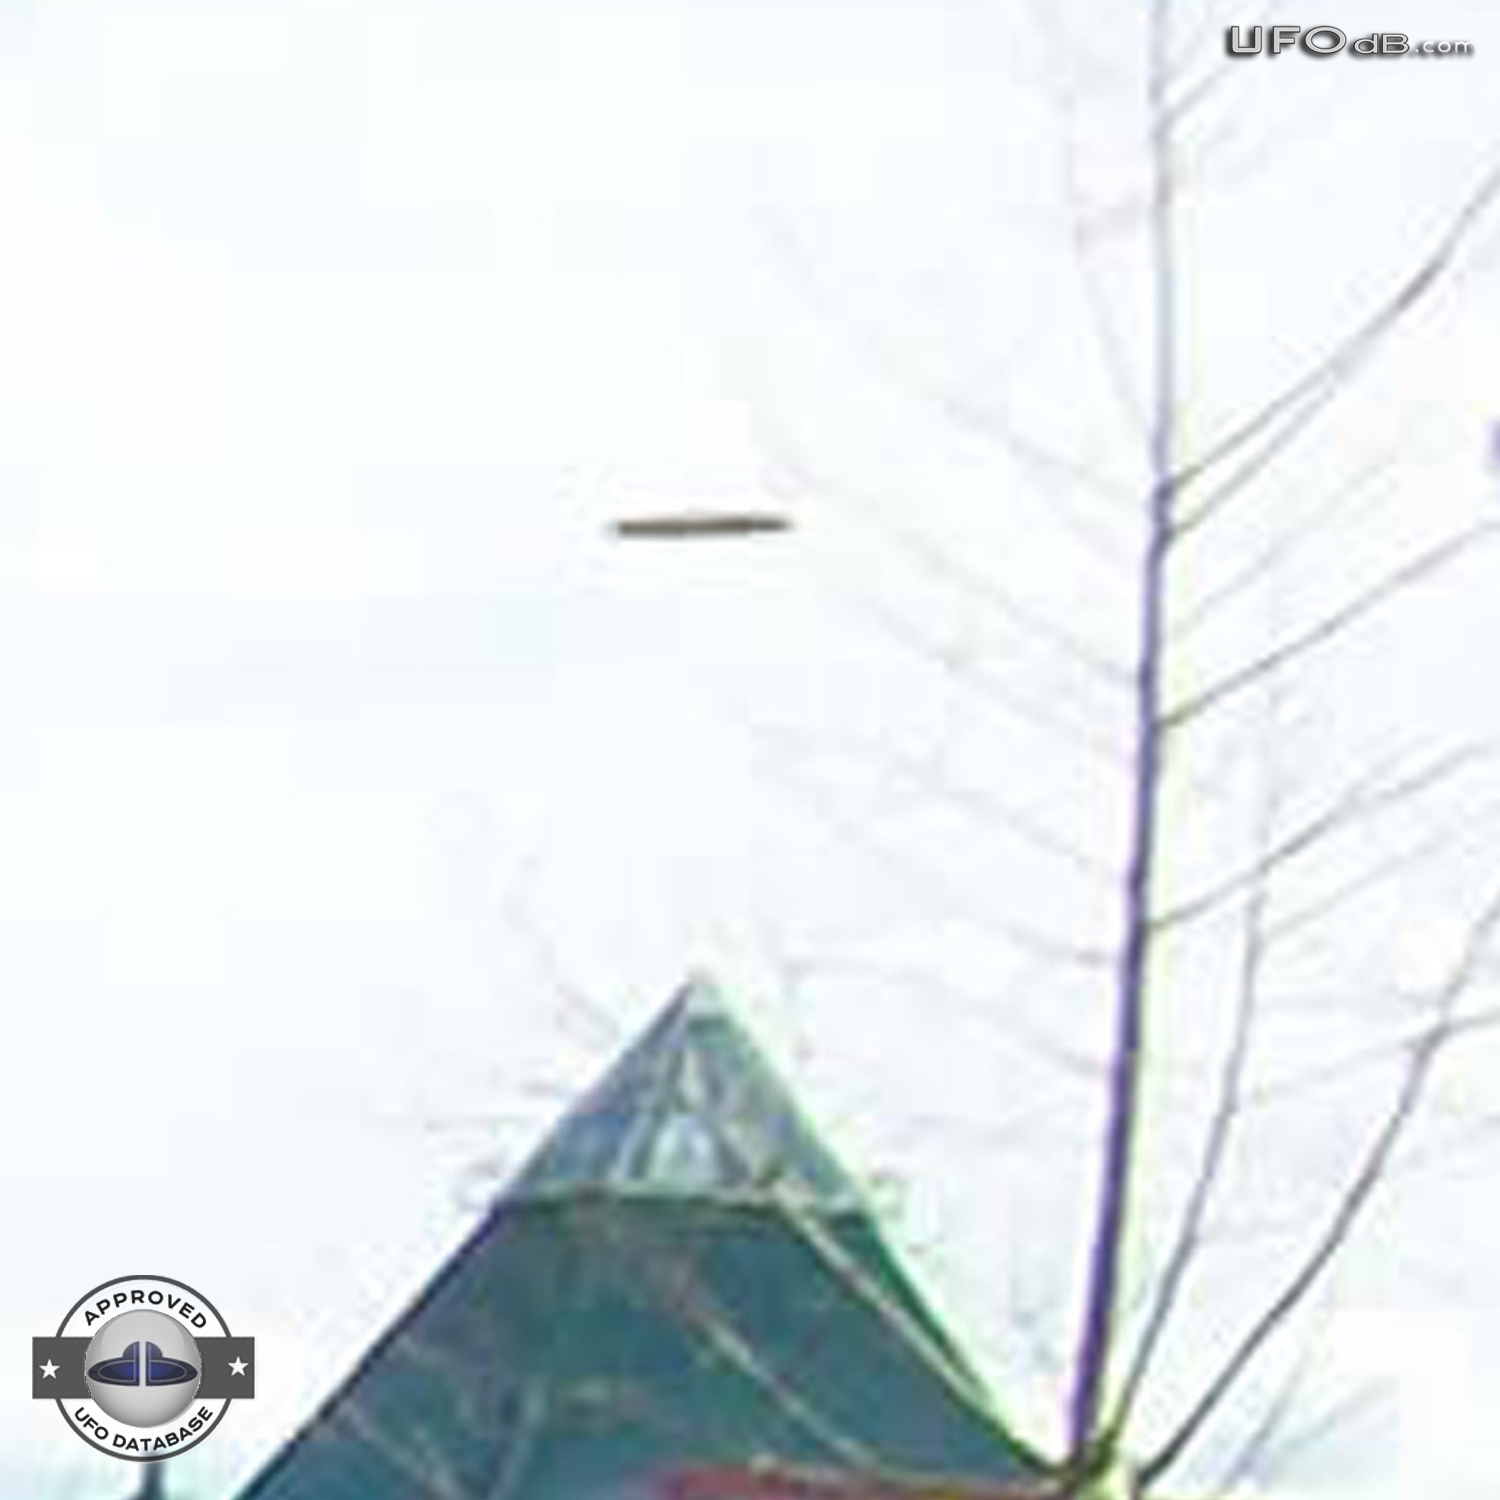 West Edmonton Mall visited by a UFO | Alberta, Canada | May 21 2011 UFO Picture #321-3